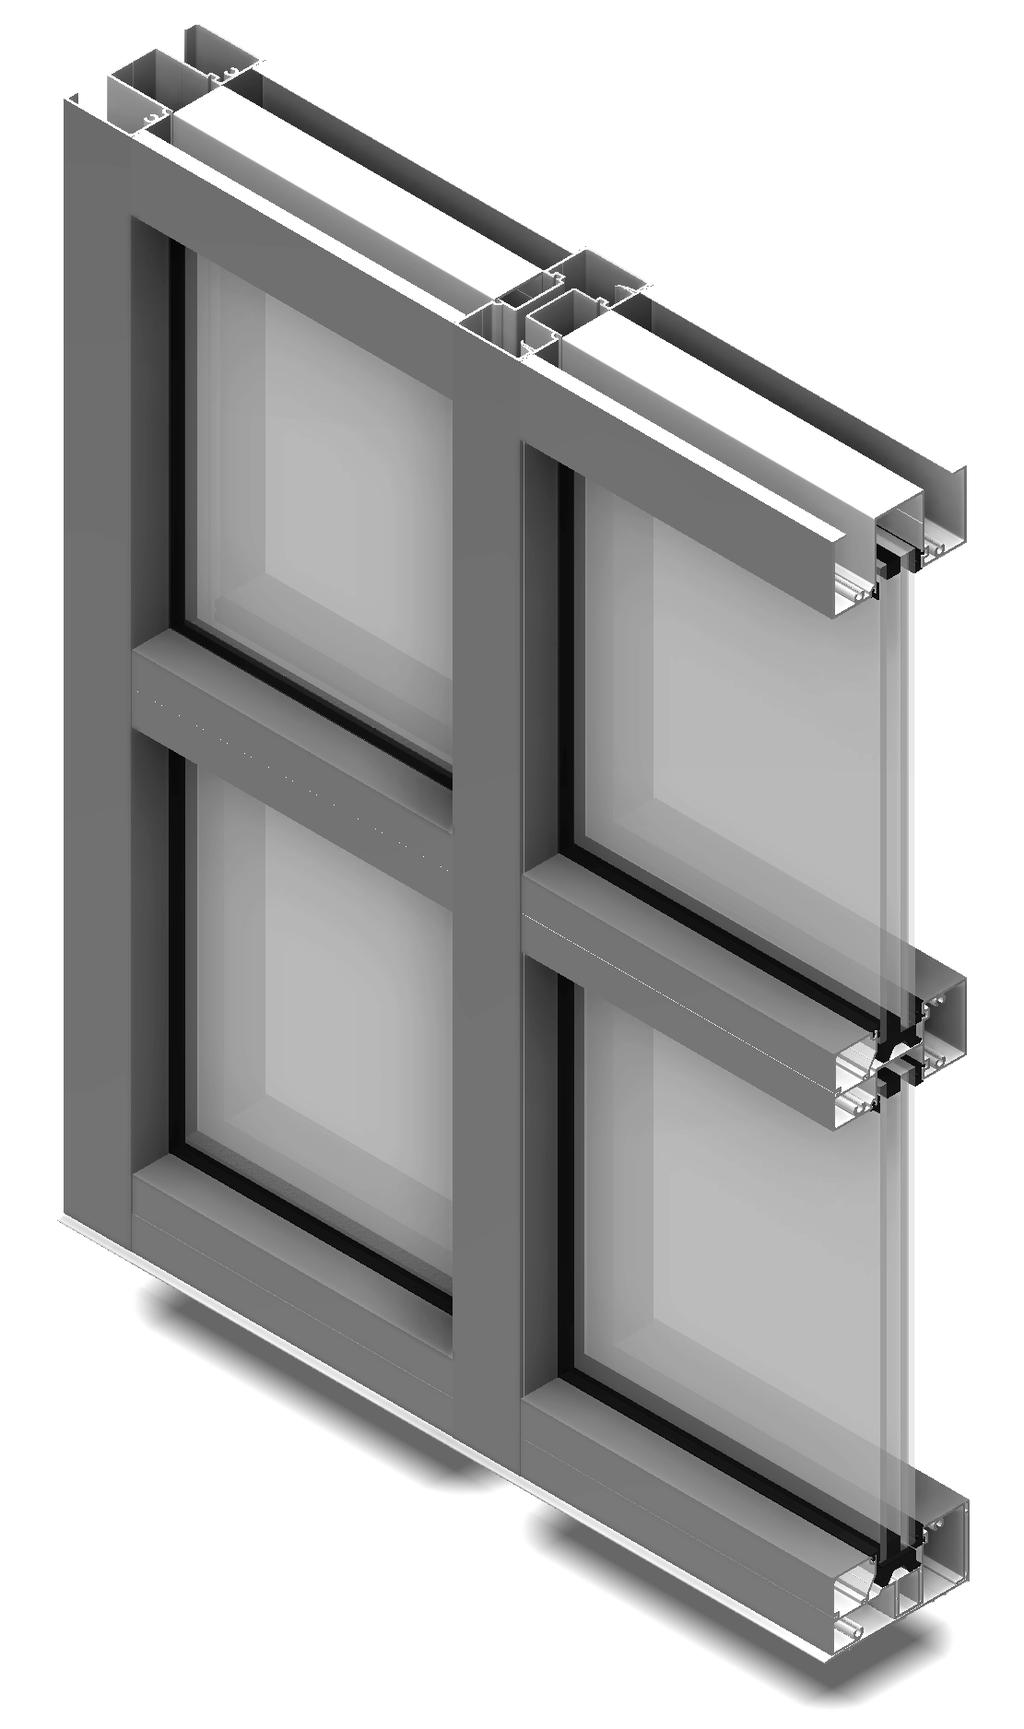 FL550 21/2 x5 System Description Series FL550 is a non-thermal 21/2 x 5 high-performance storefront system designed to accept 15/16 insulated laminated glass.